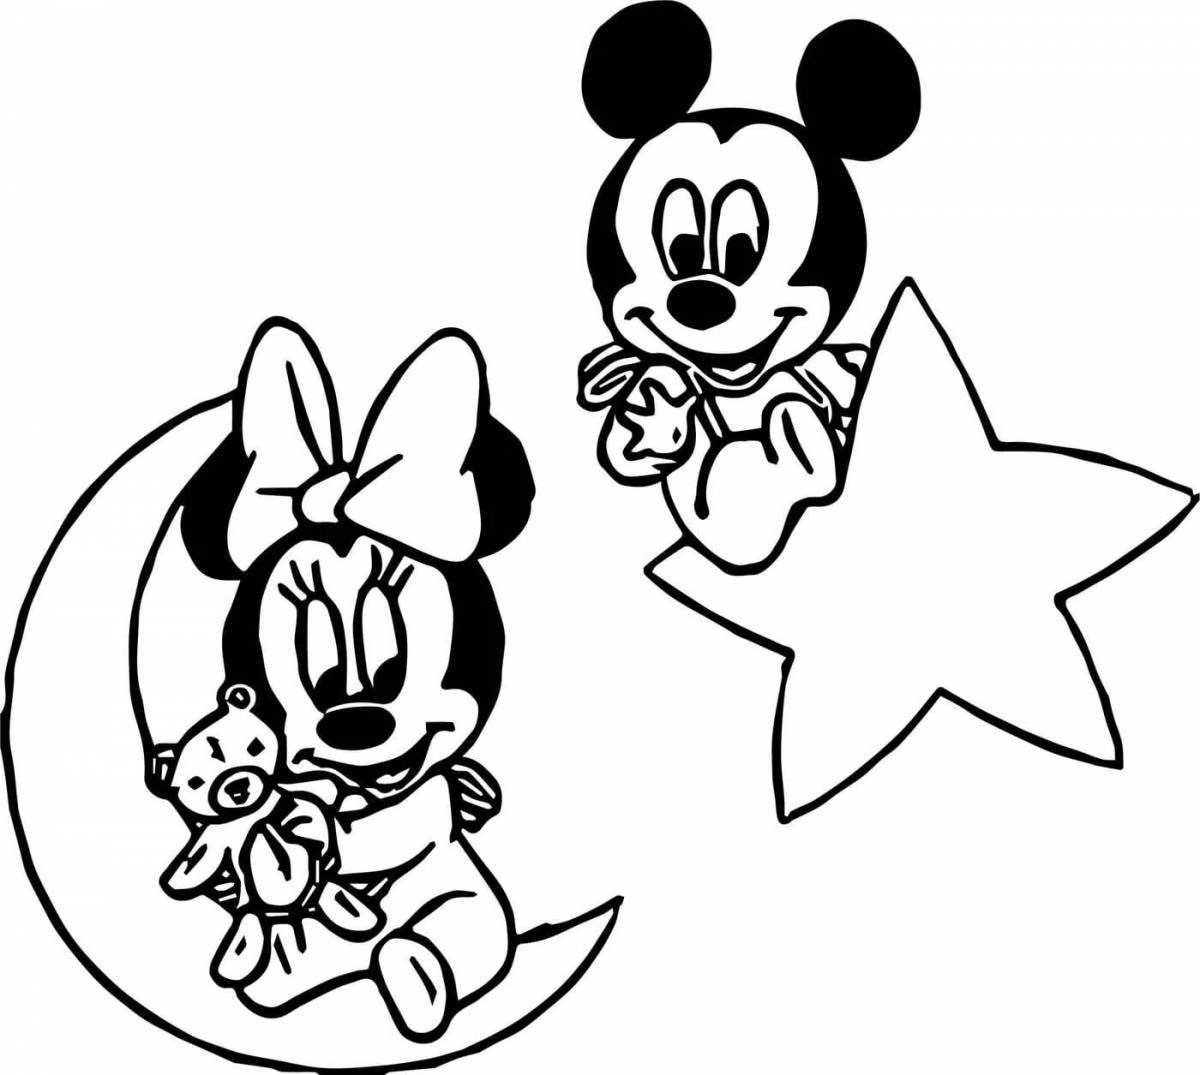 Fun coloring mickey mouse and minnie mouse